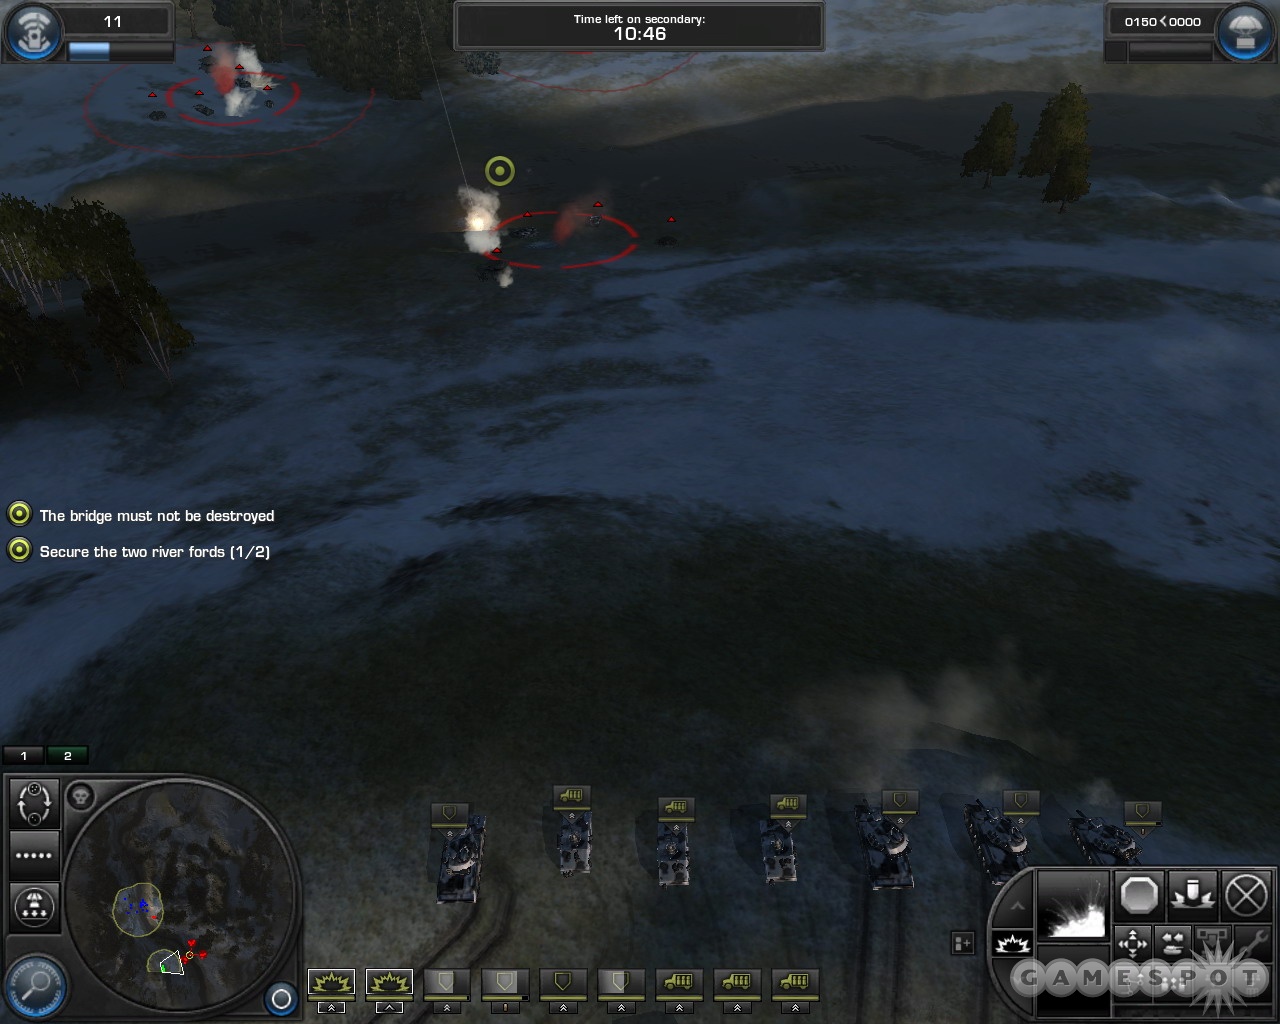 Sit your tanks on high ground to get a tactical advantage and fire from a distance.